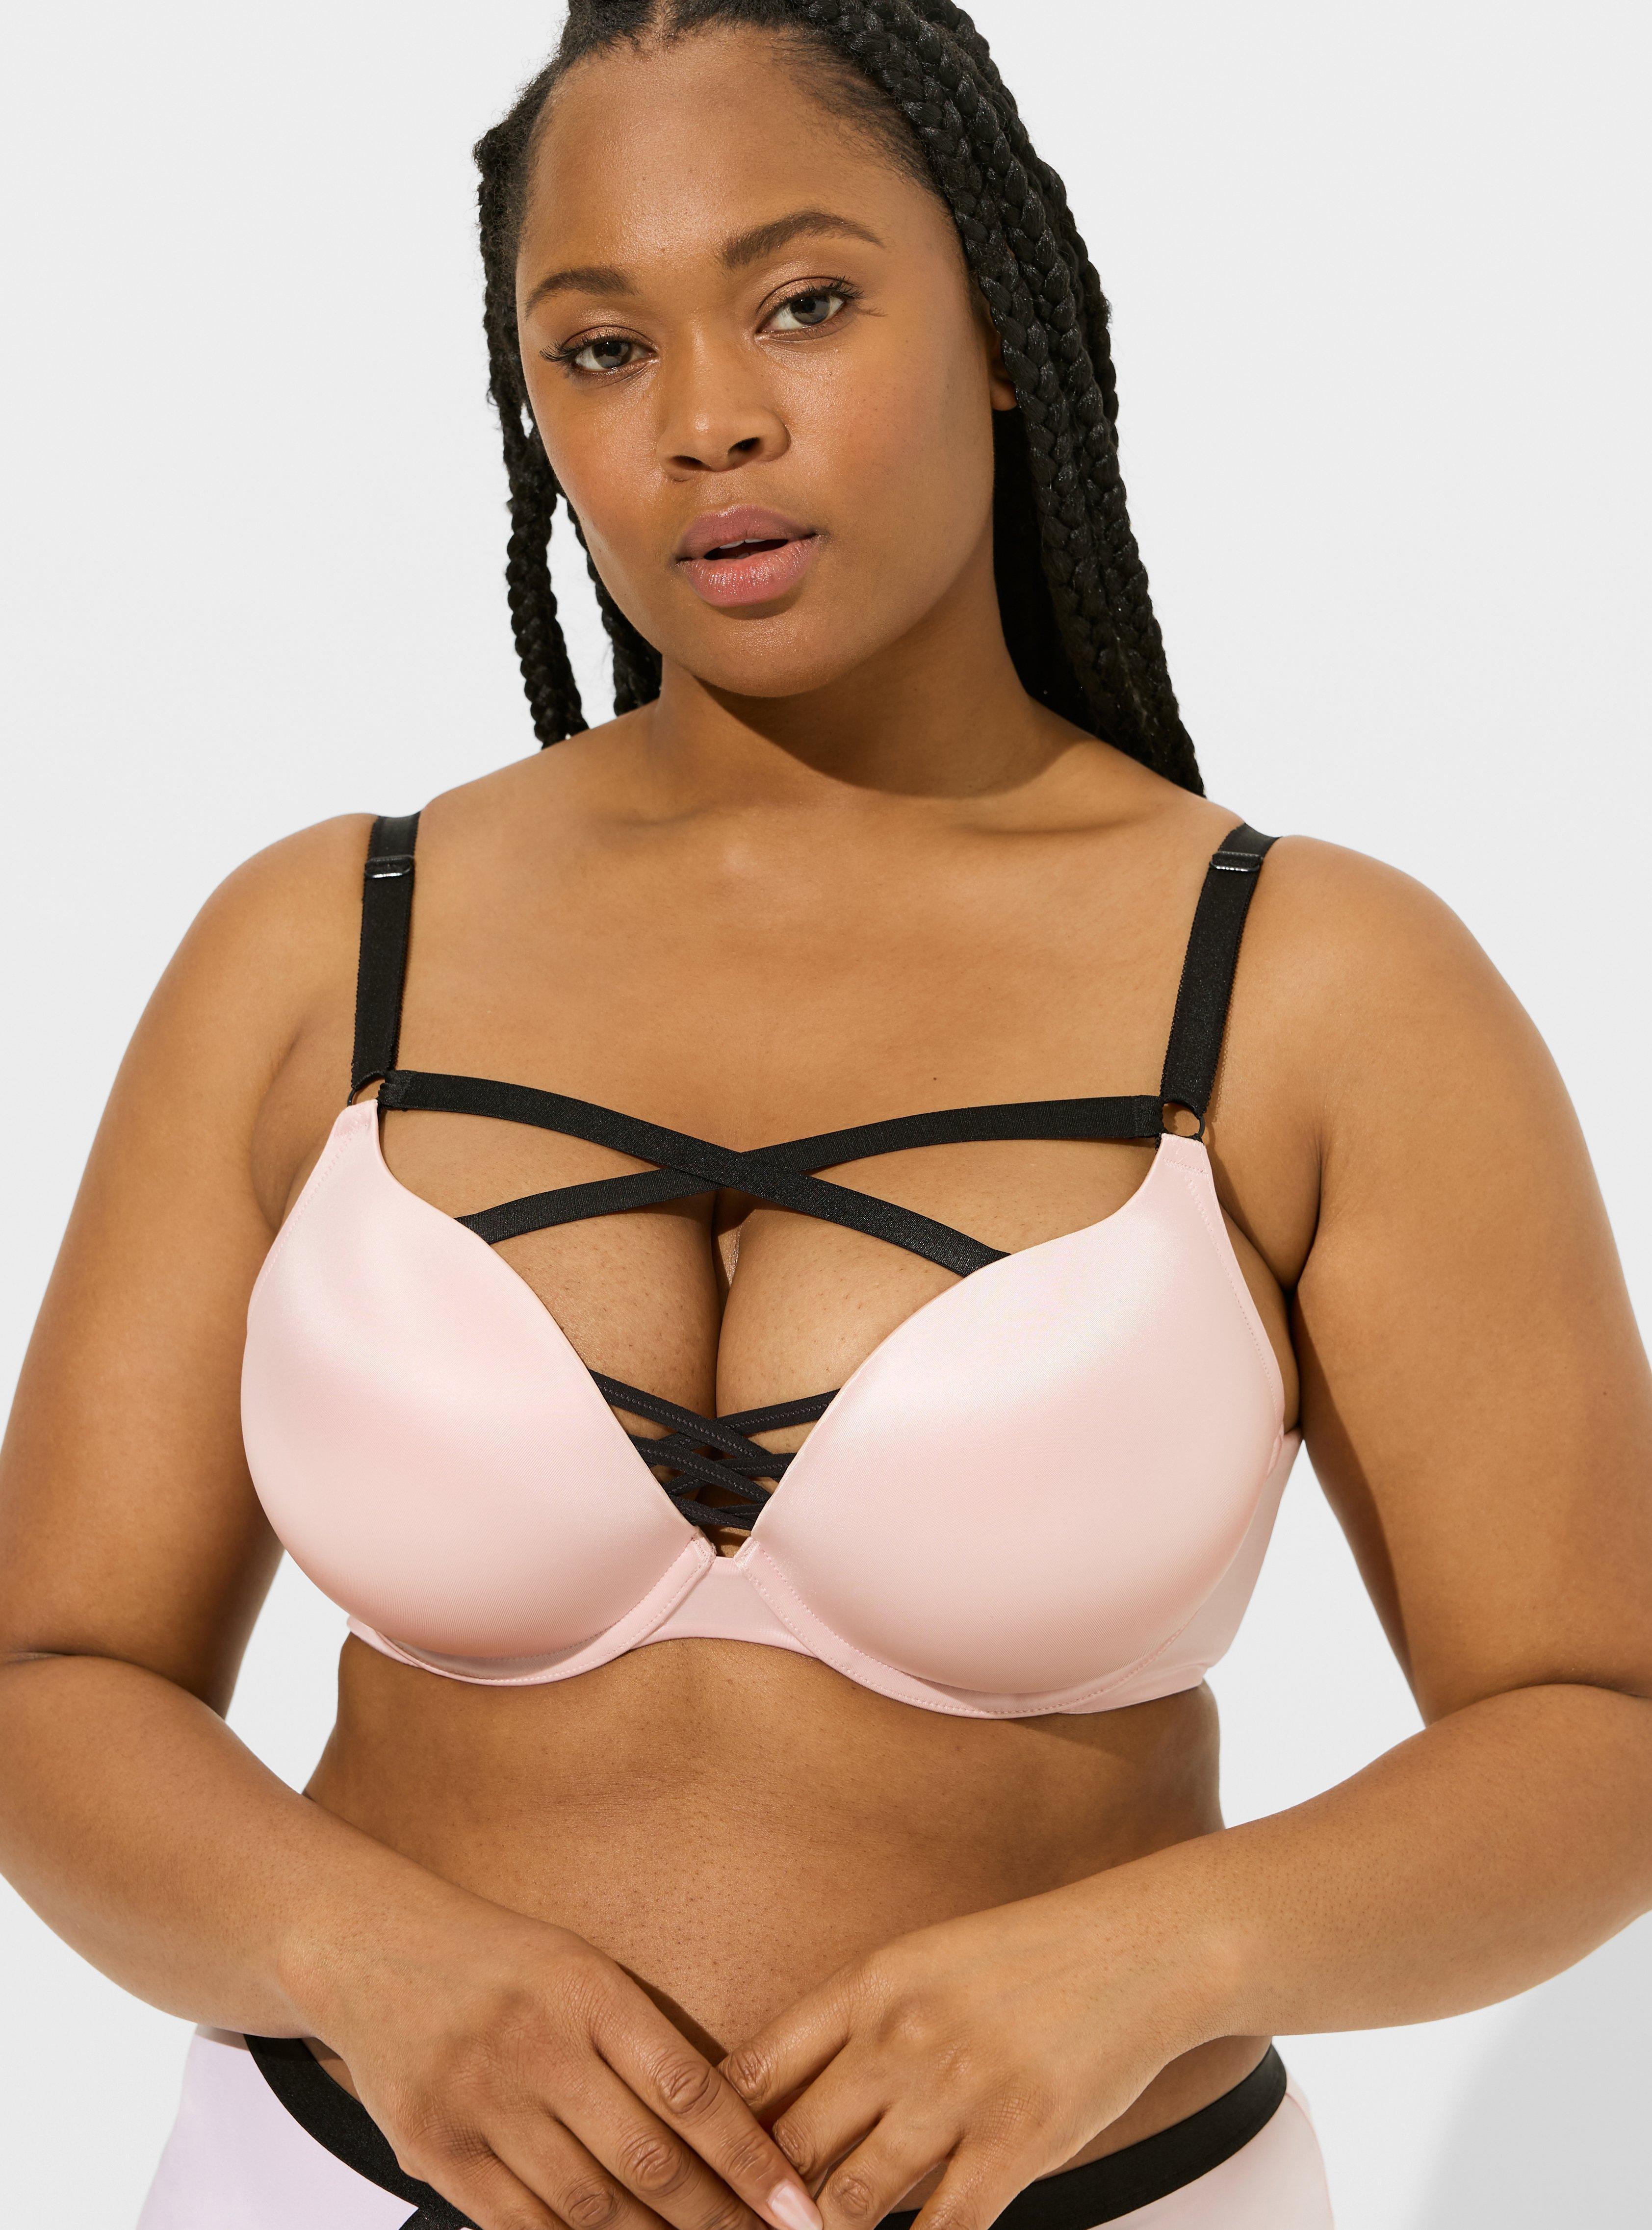 Women Bras Close-up. Many Different Bras Lin Gerie Stock Photo